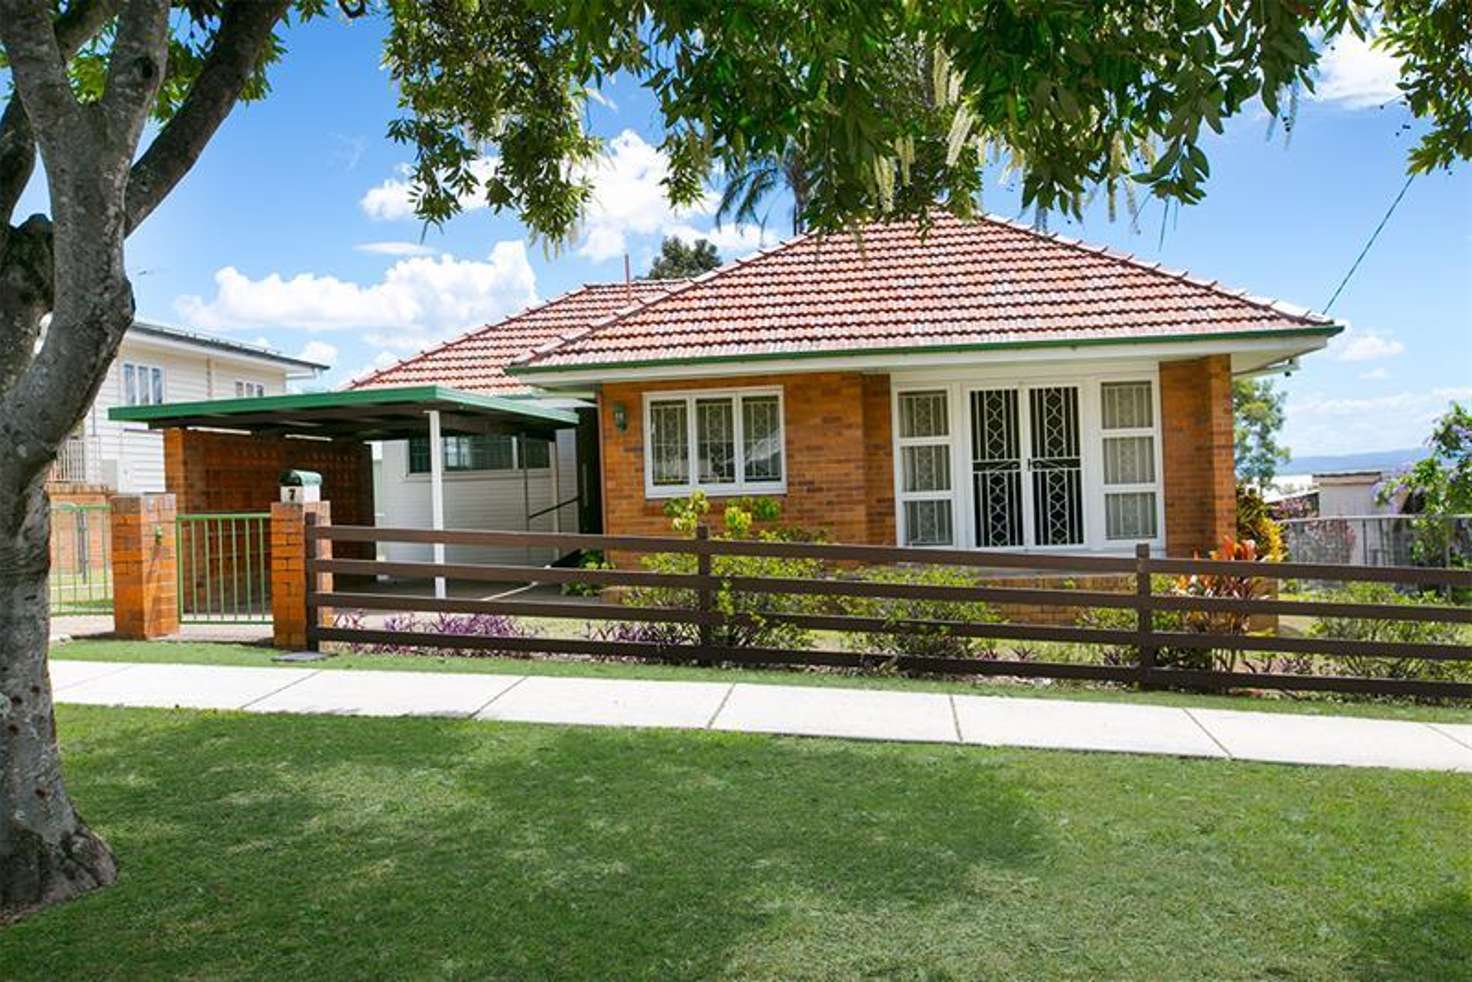 Main view of Homely house listing, 7 Corsica St, Moorooka QLD 4105